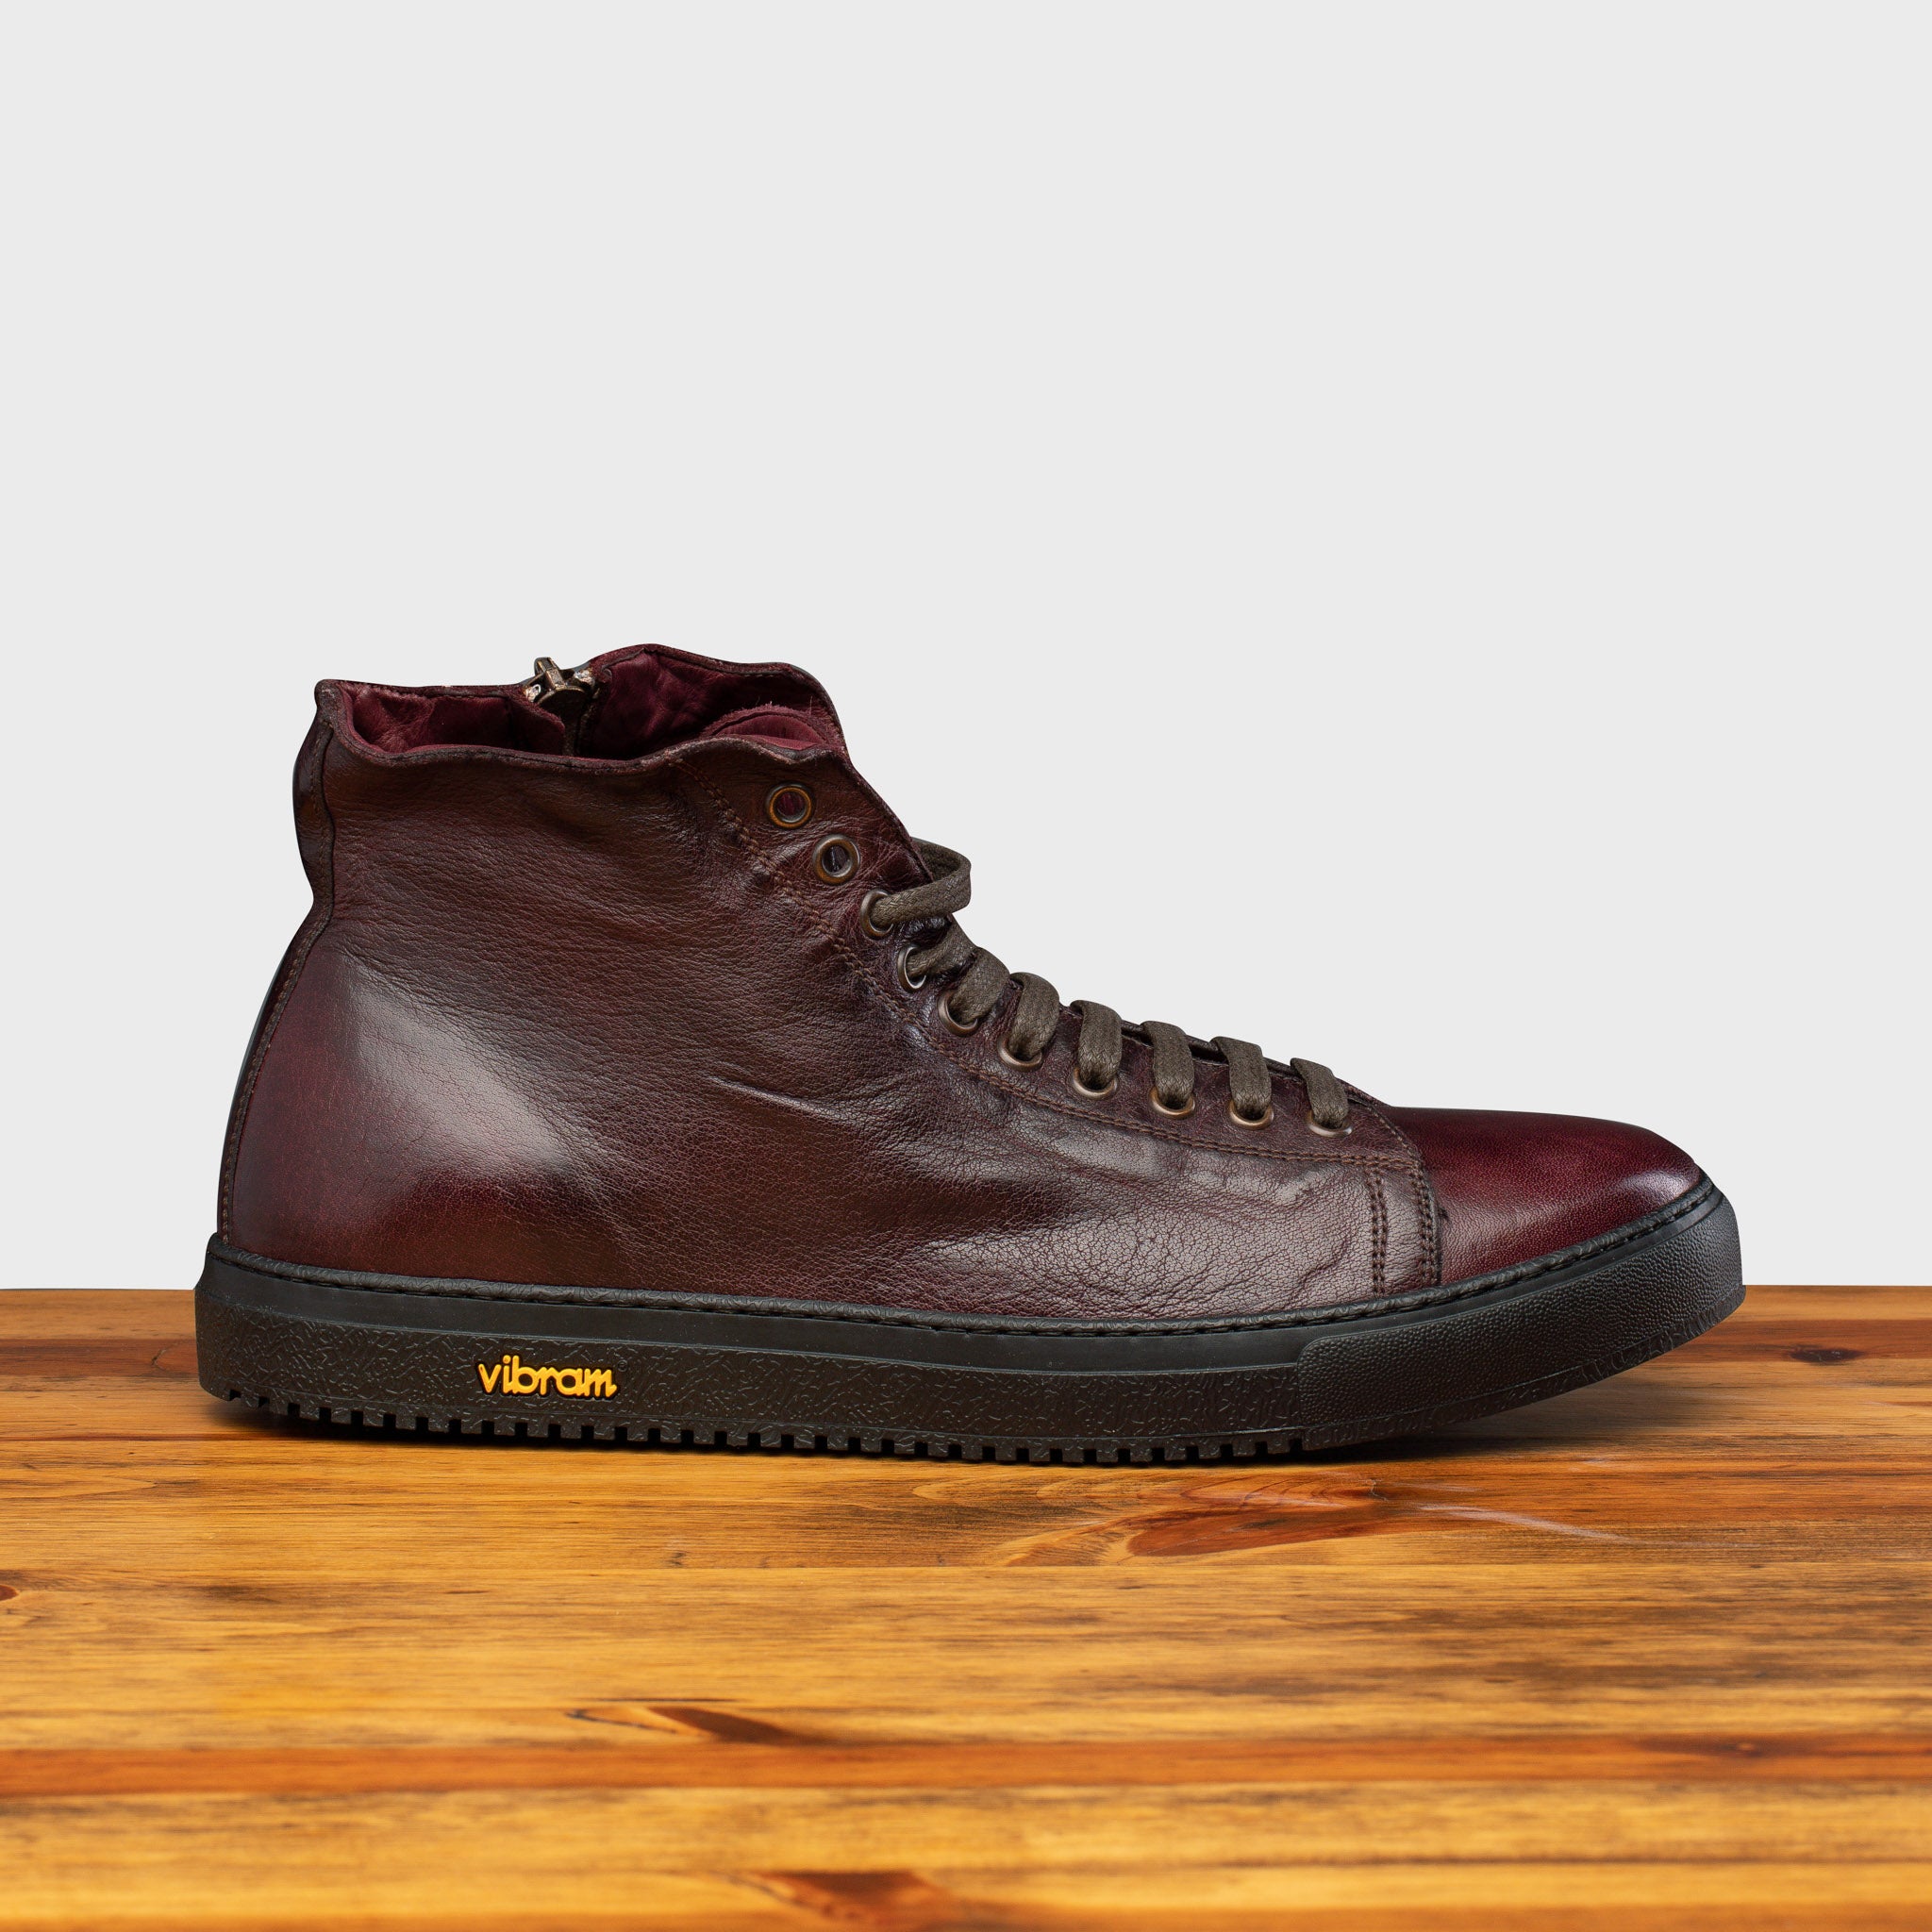 Side profile of H883 Calzoleria Toscana Liver High Top Benso Sneaker on top of a wooden table